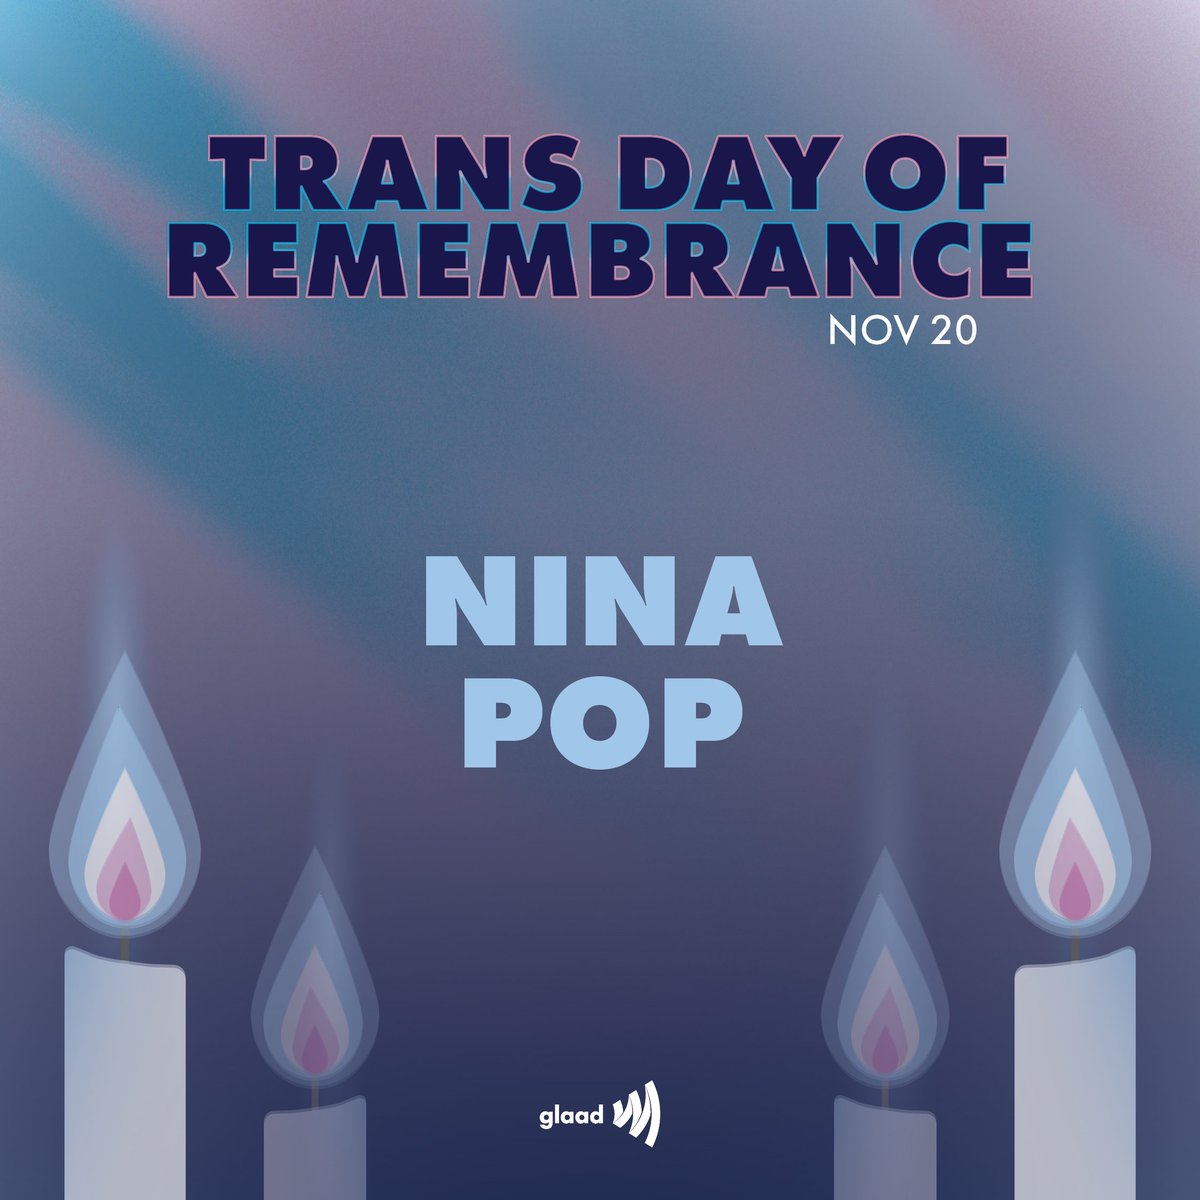 Nina Pop, a Black transgender woman, was killed in Sikeston, Missouri on May 3, 2020. She was deeply loved by her family and community.